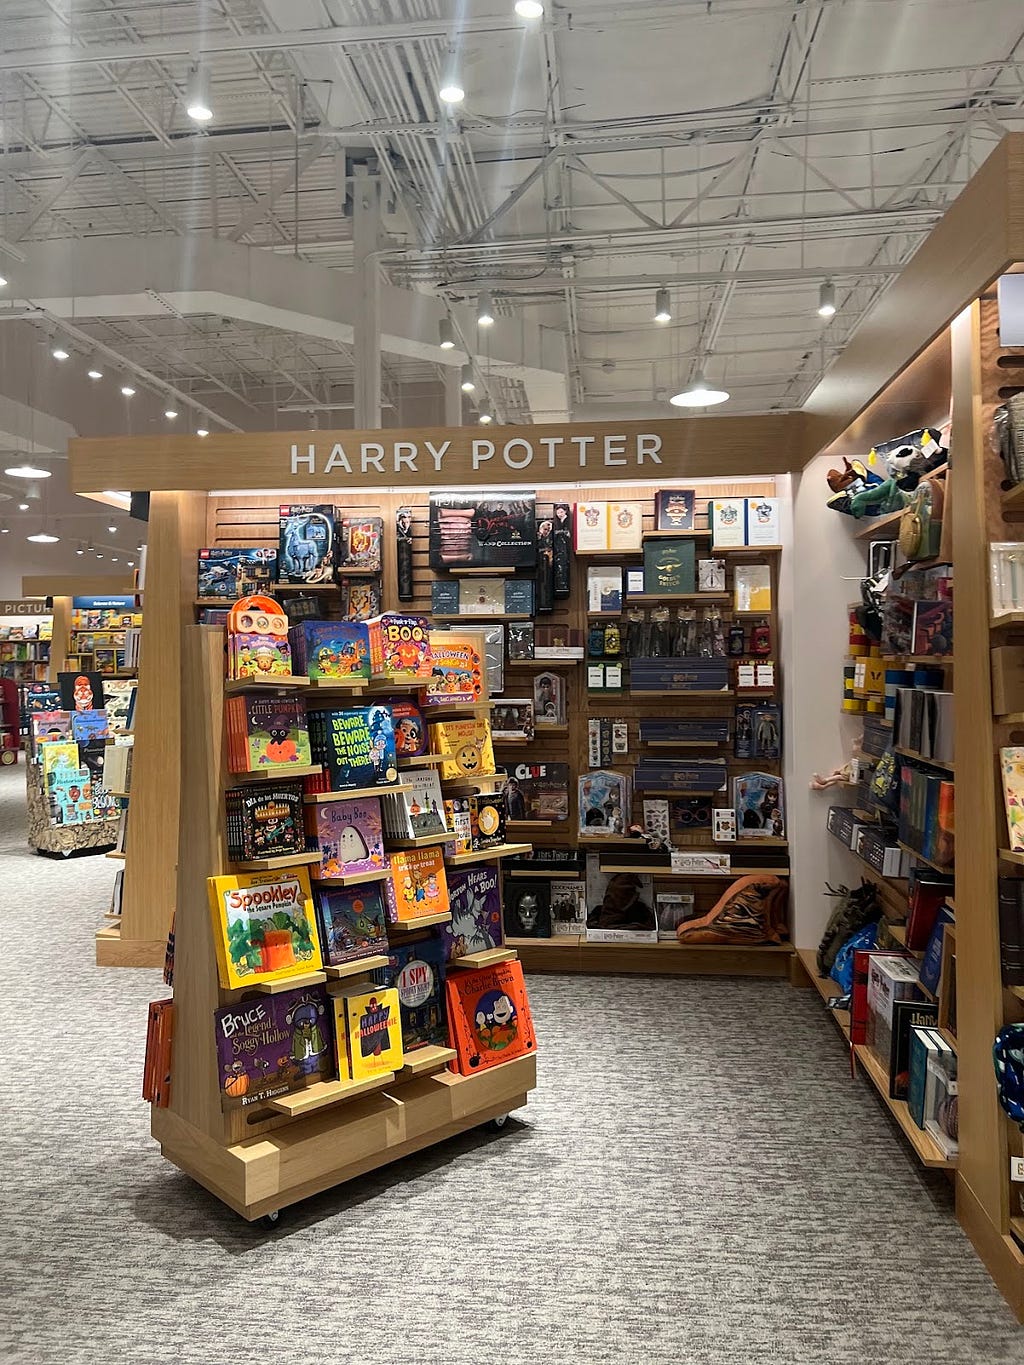 An image of the Harry Potter section in Barnes and Noble.